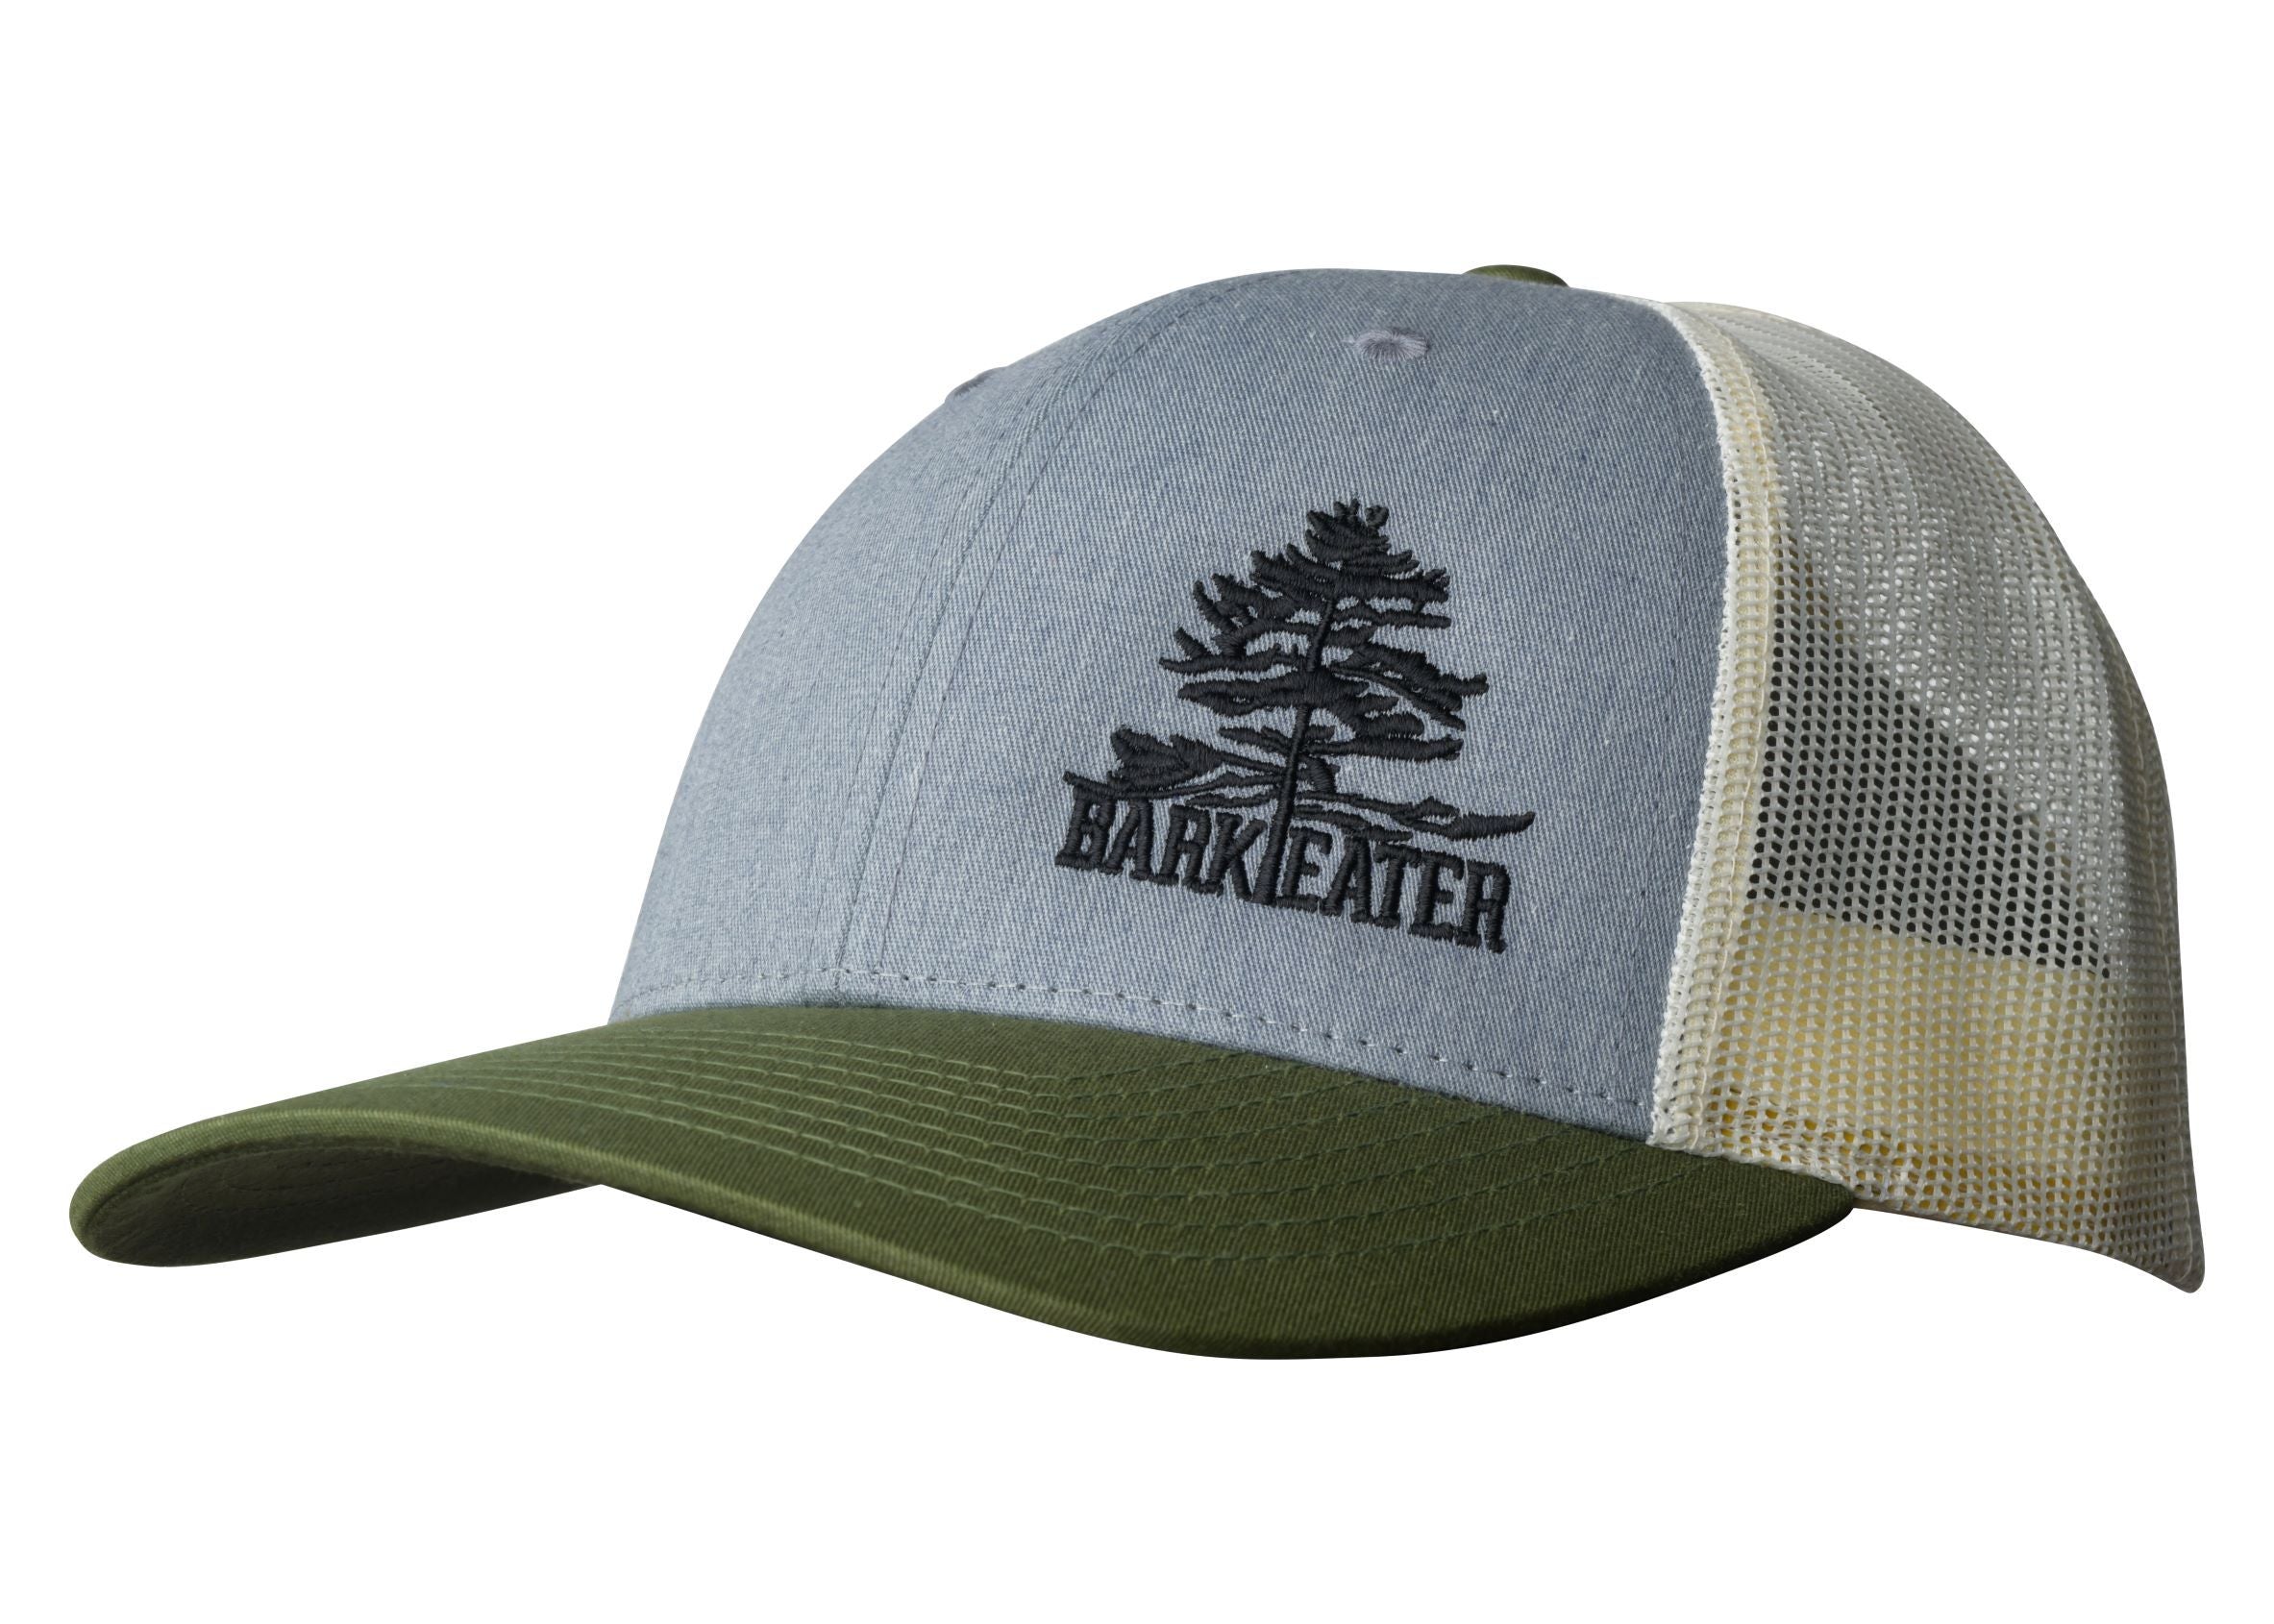 The Adirondack Trapper Trucker features the Bark Eater Outfitters logo in black off-camber on a classic grey trucker hat with amber mesh and an olive brim. Adjustable snapback.